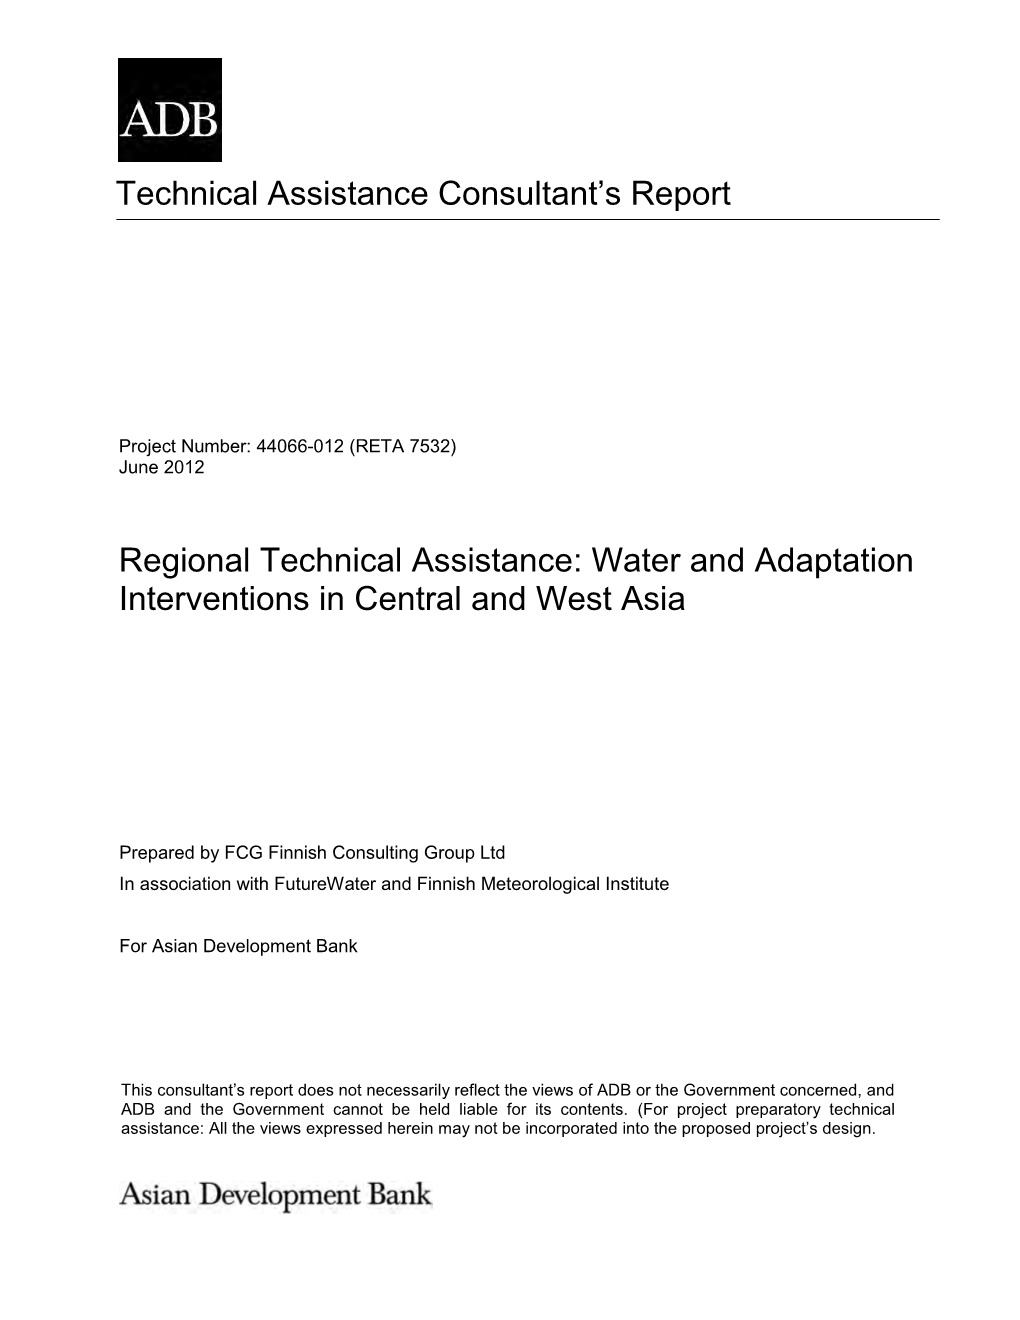 Water and Adaptation Interventions in Central and West Asia